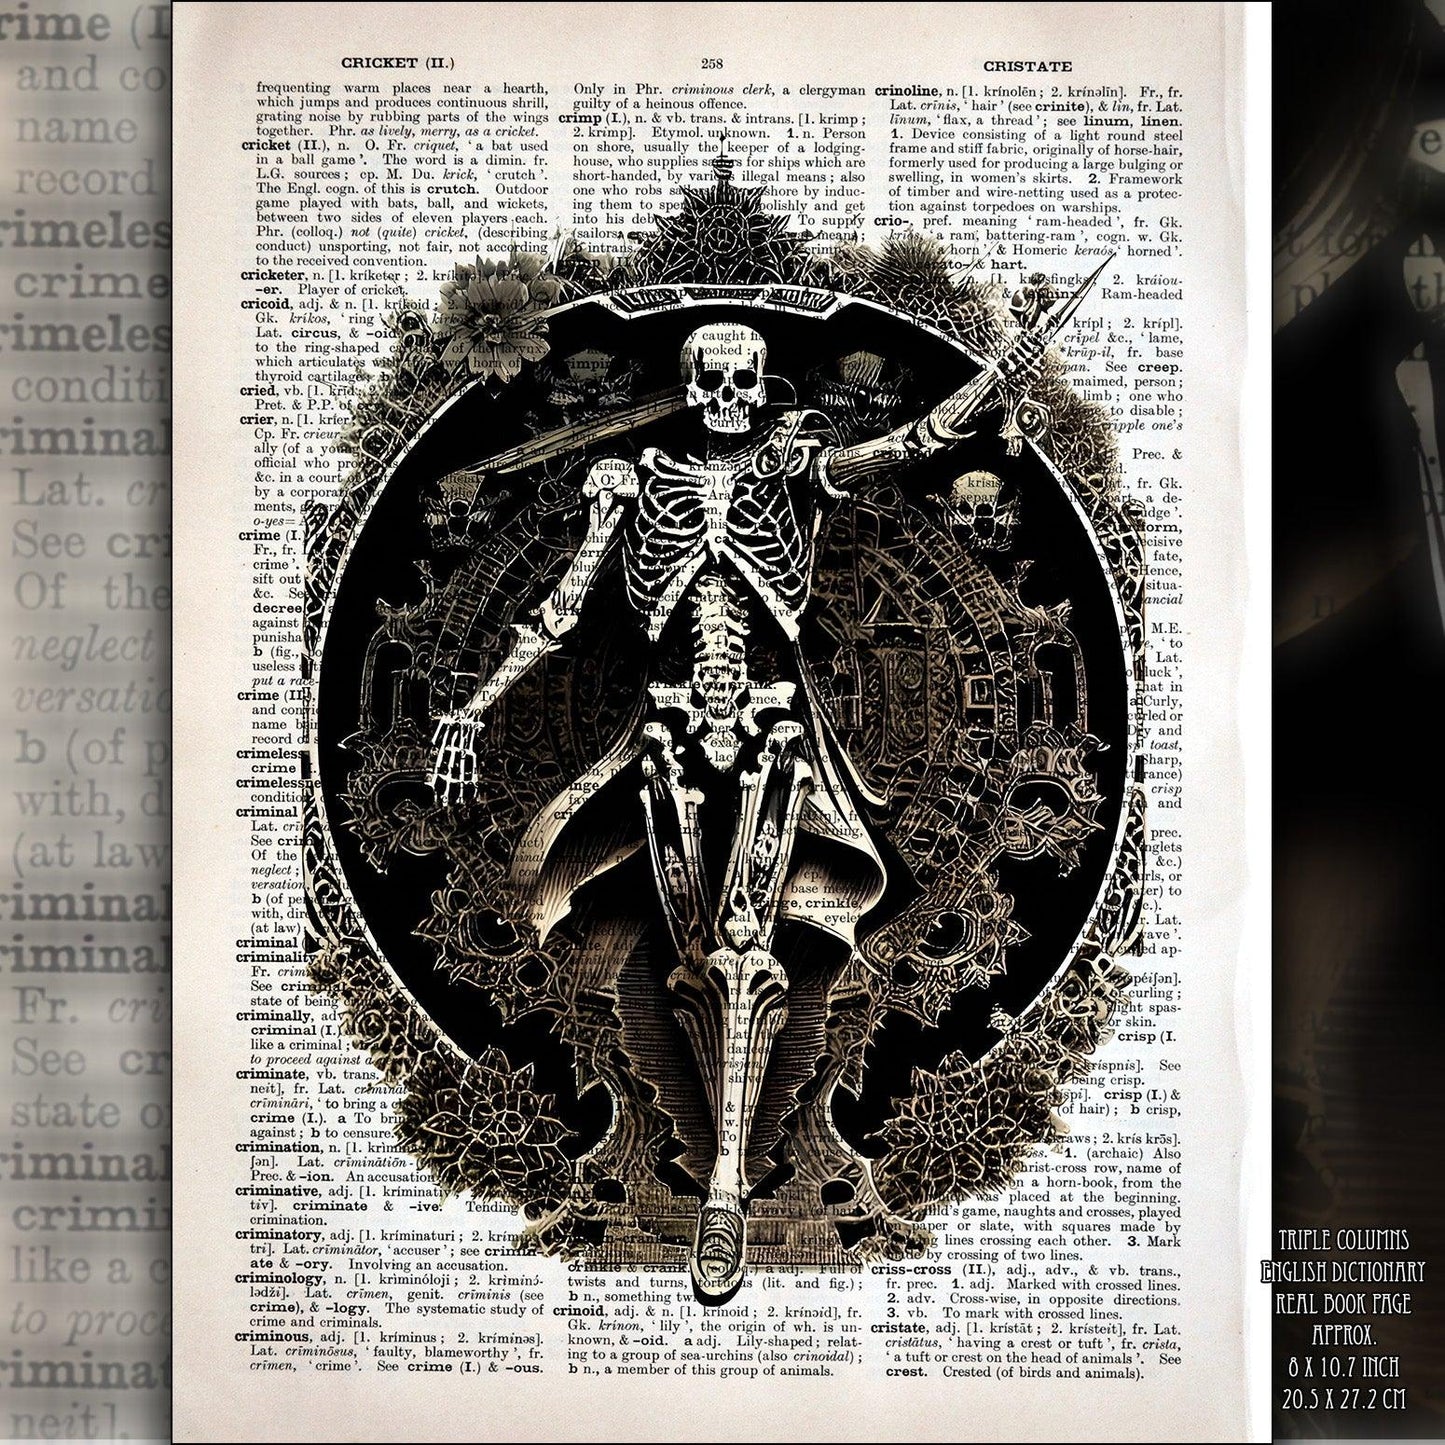 Gothic Boho Home Decor: Vintage Victorian Wall Dictionary Art with Macabre Skull and Dark Aesthetic - ArtCursor